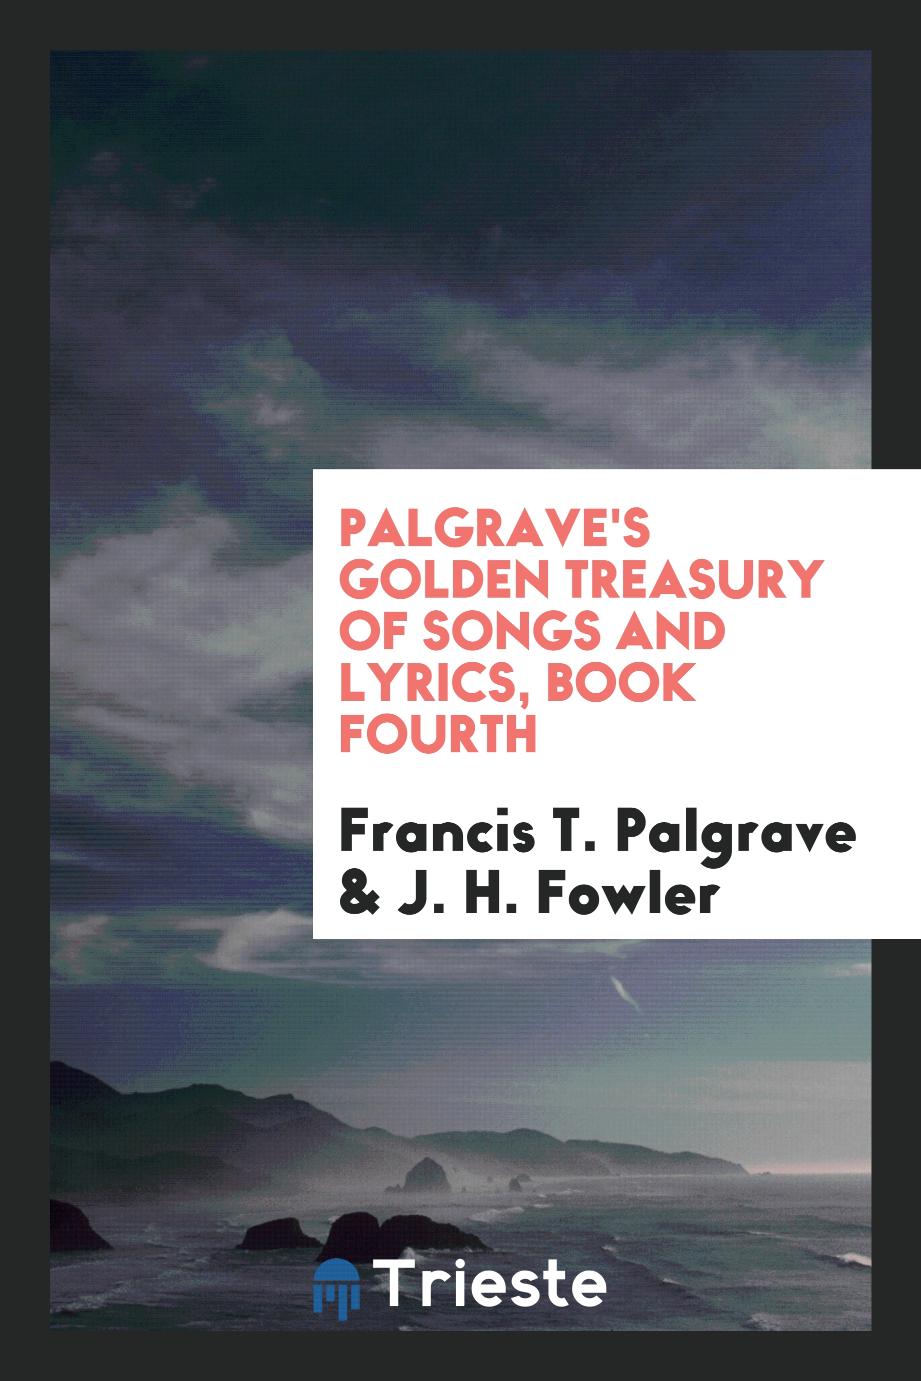 Palgrave's Golden Treasury of Songs and Lyrics, Book Fourth